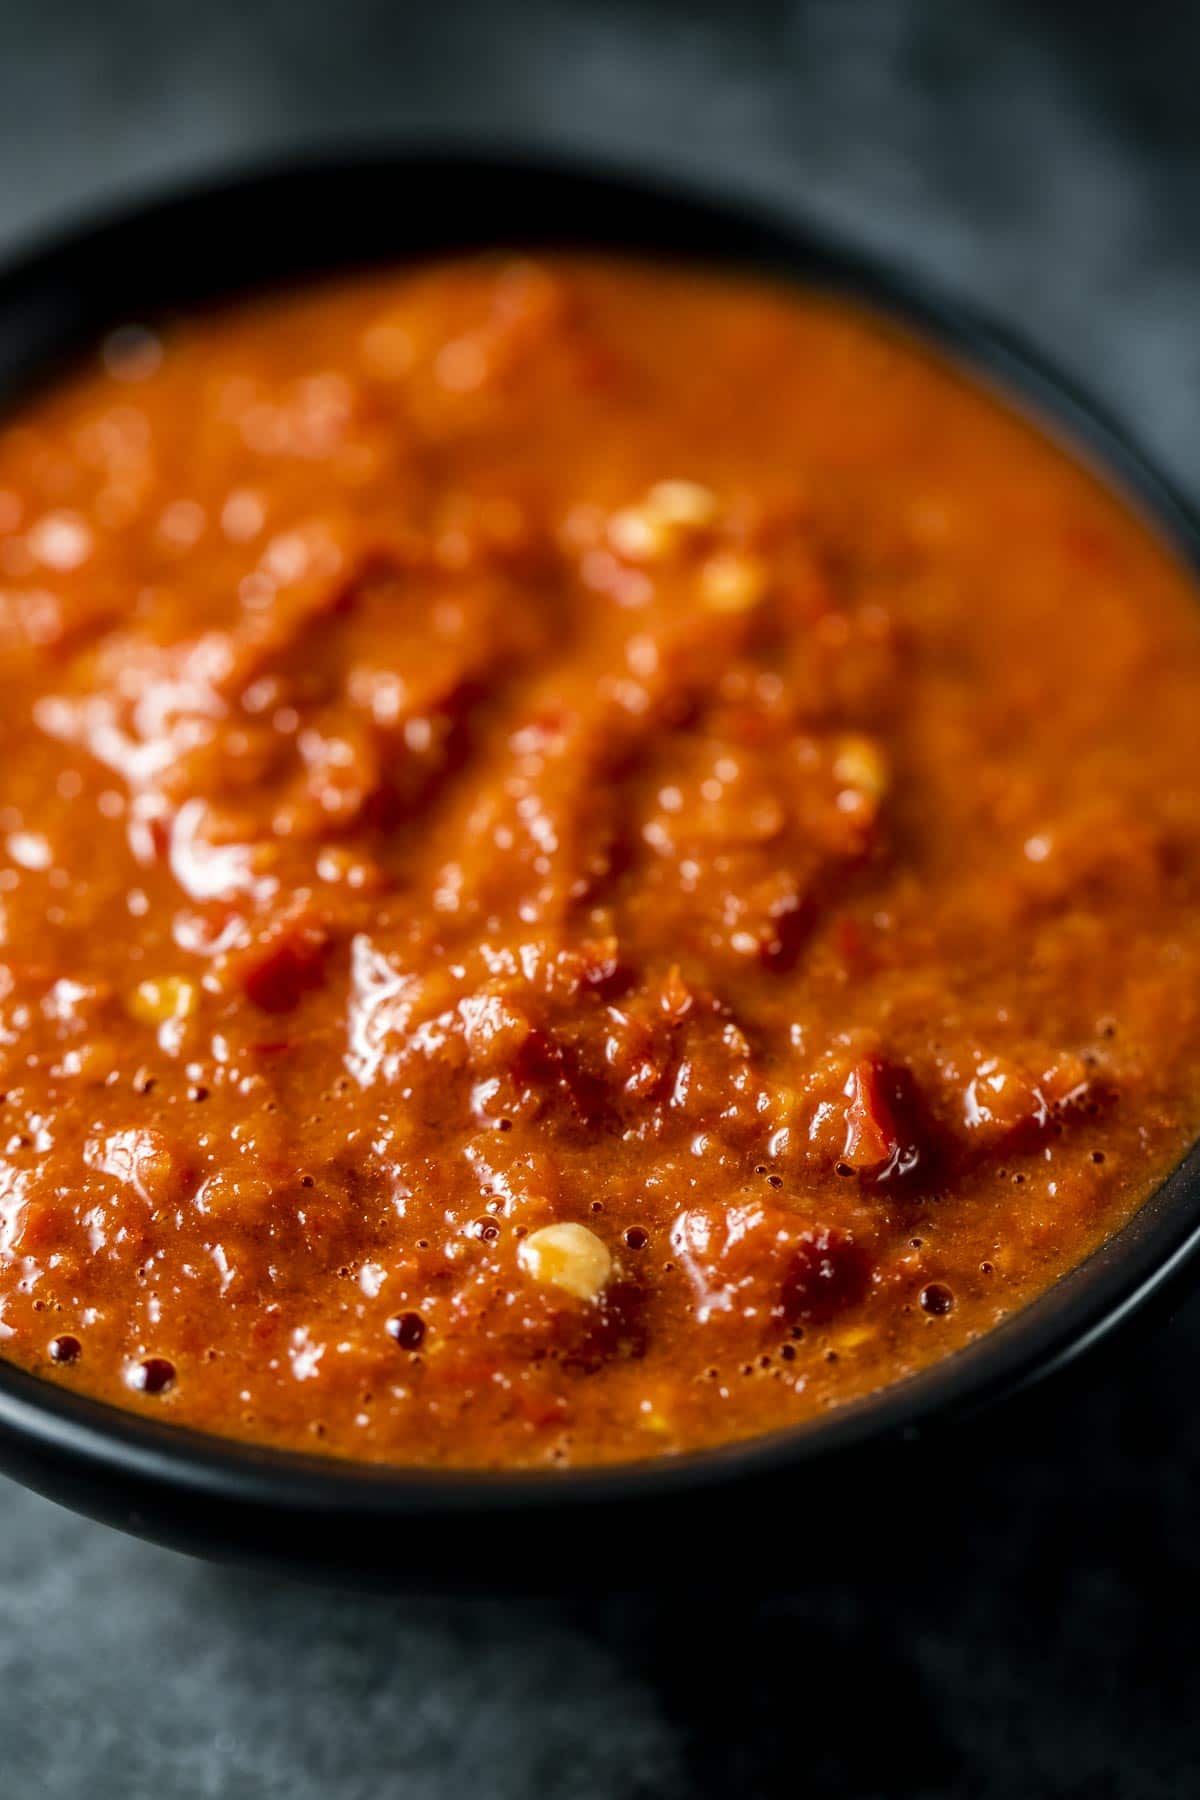 Close up ¾ view of sambal belacan in a bowl.